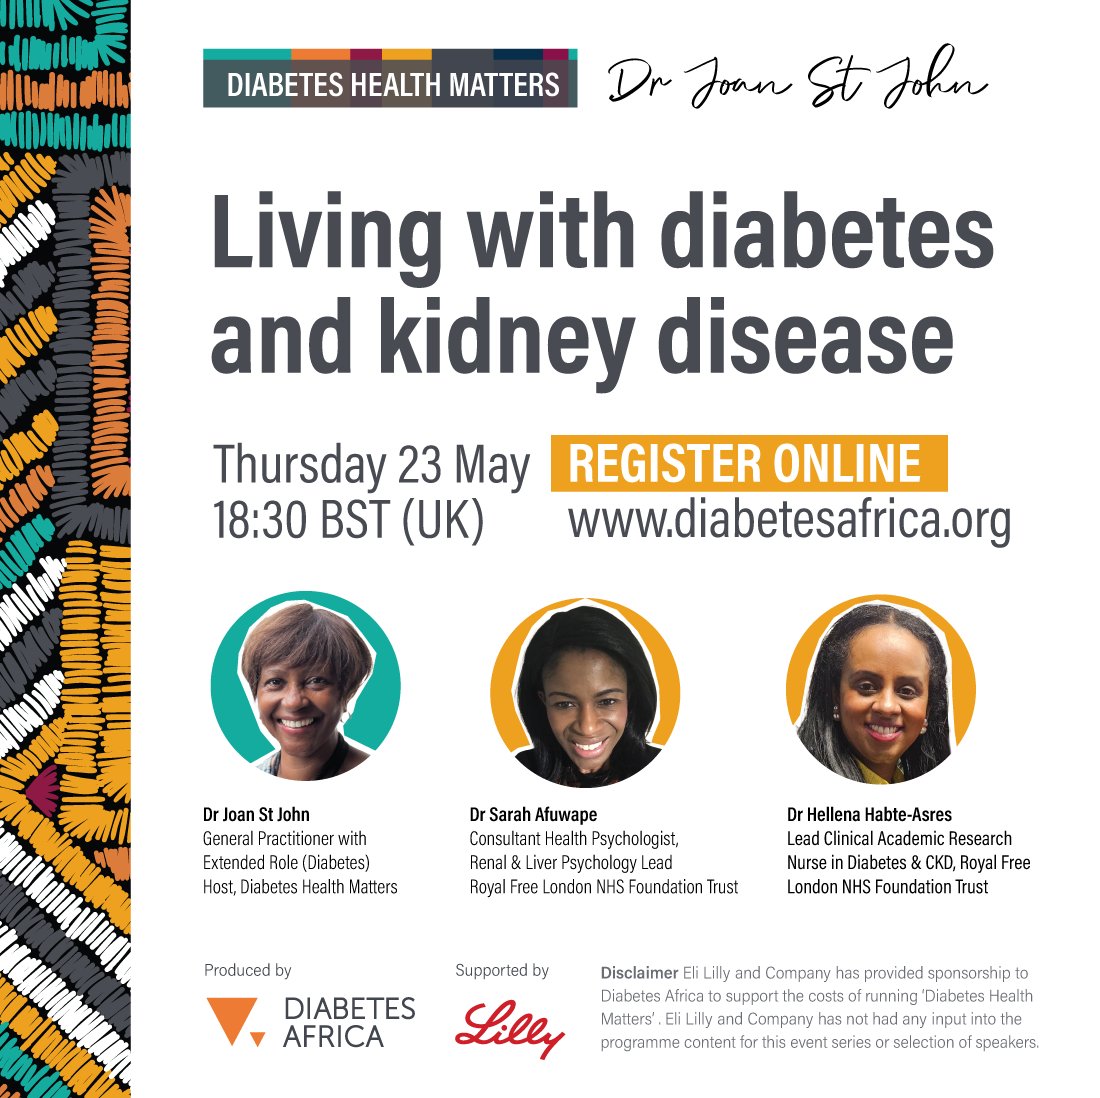 Diabetes Health Matters is back! Join Dr Joan St John in the first event of the season where we will be discussing how to live a full life when living with diabetes and kidney disease. Register here: us06web.zoom.us/meeting/regist… @BouncyB101 @HellenaHH2020 @DrAfuwape_Psych